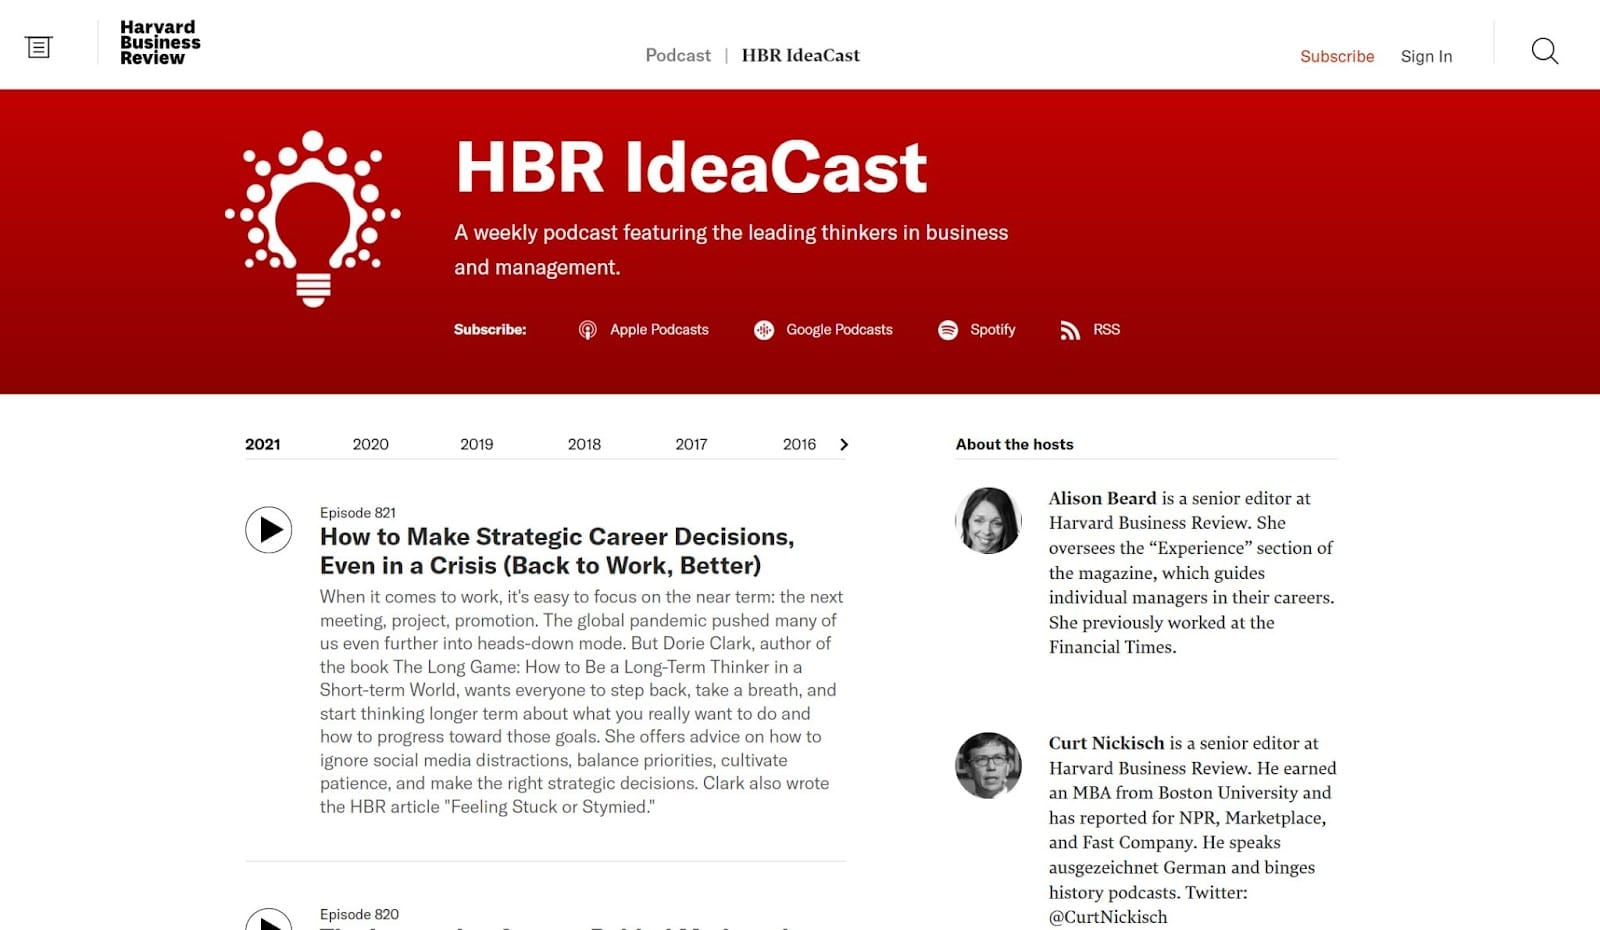 Screenshot of the HBR IdeaCast podcast homepage